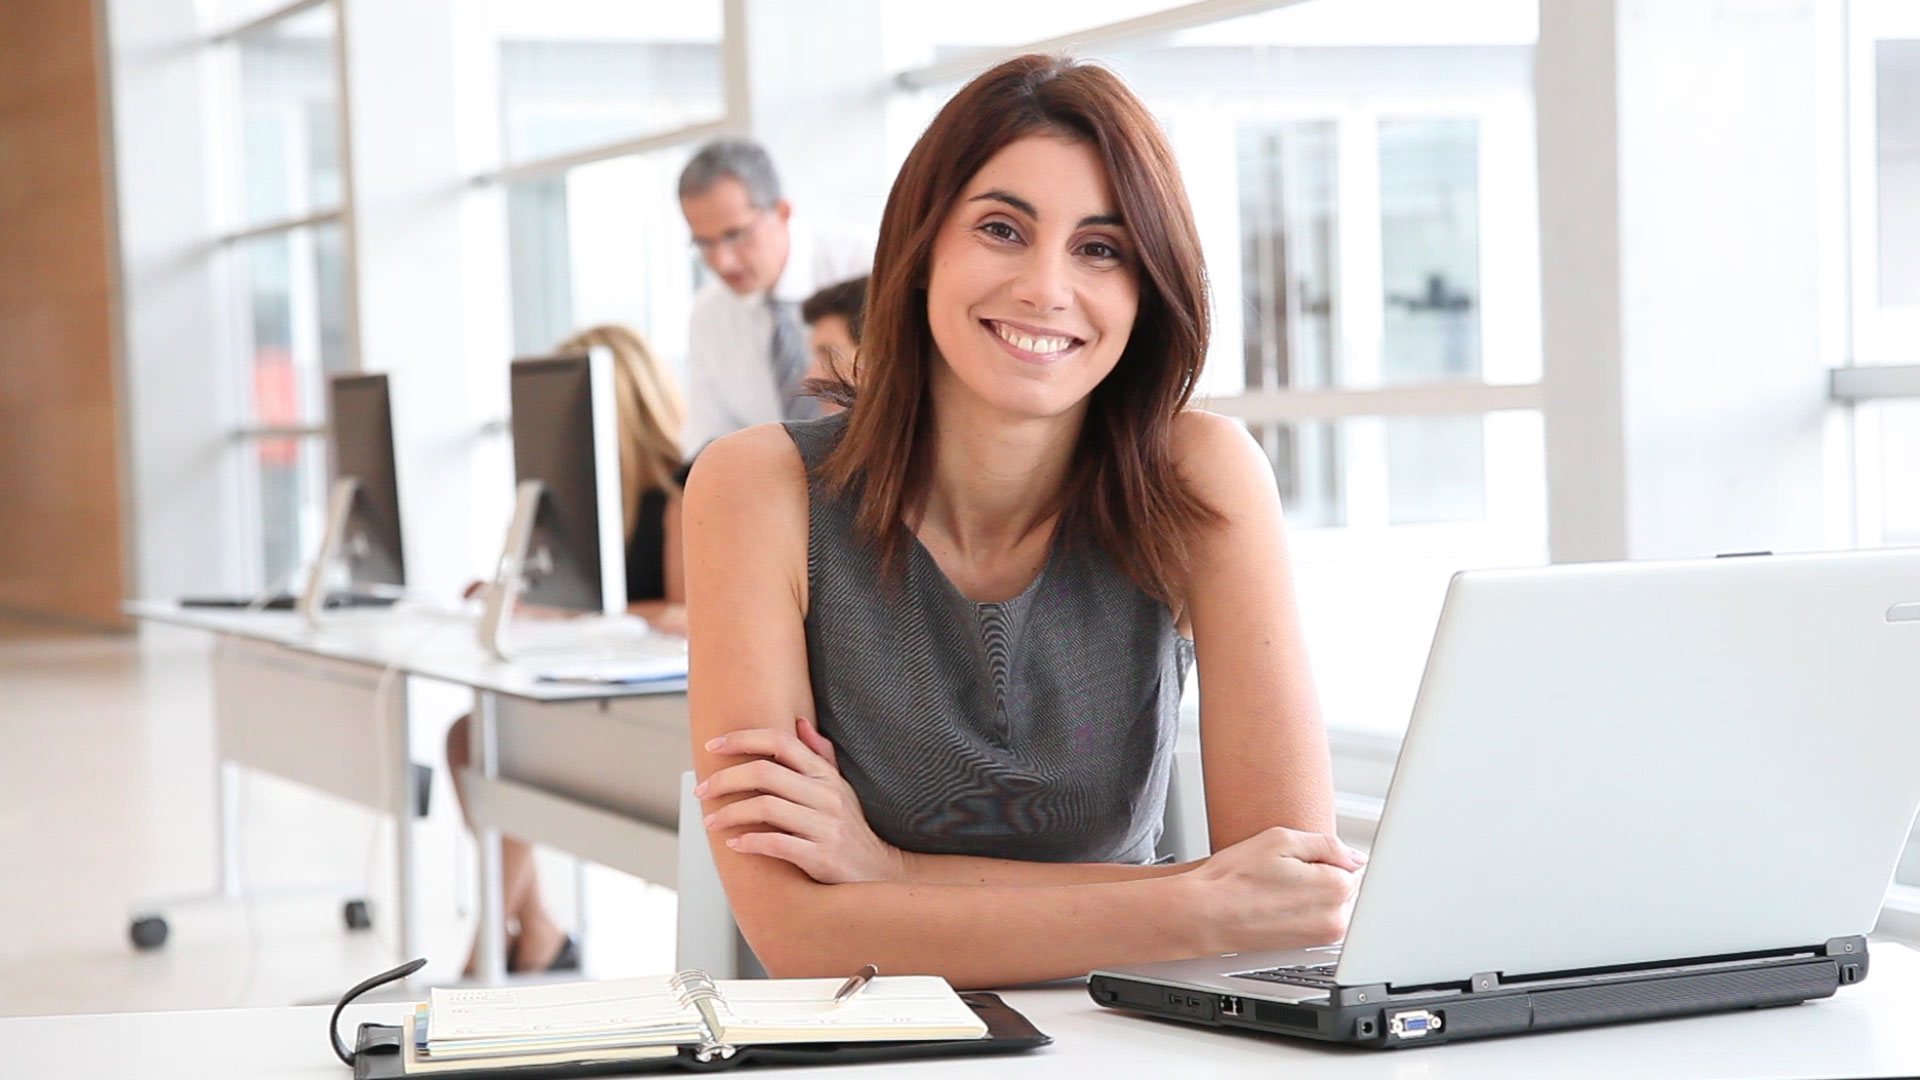 Confident lady working on office computer